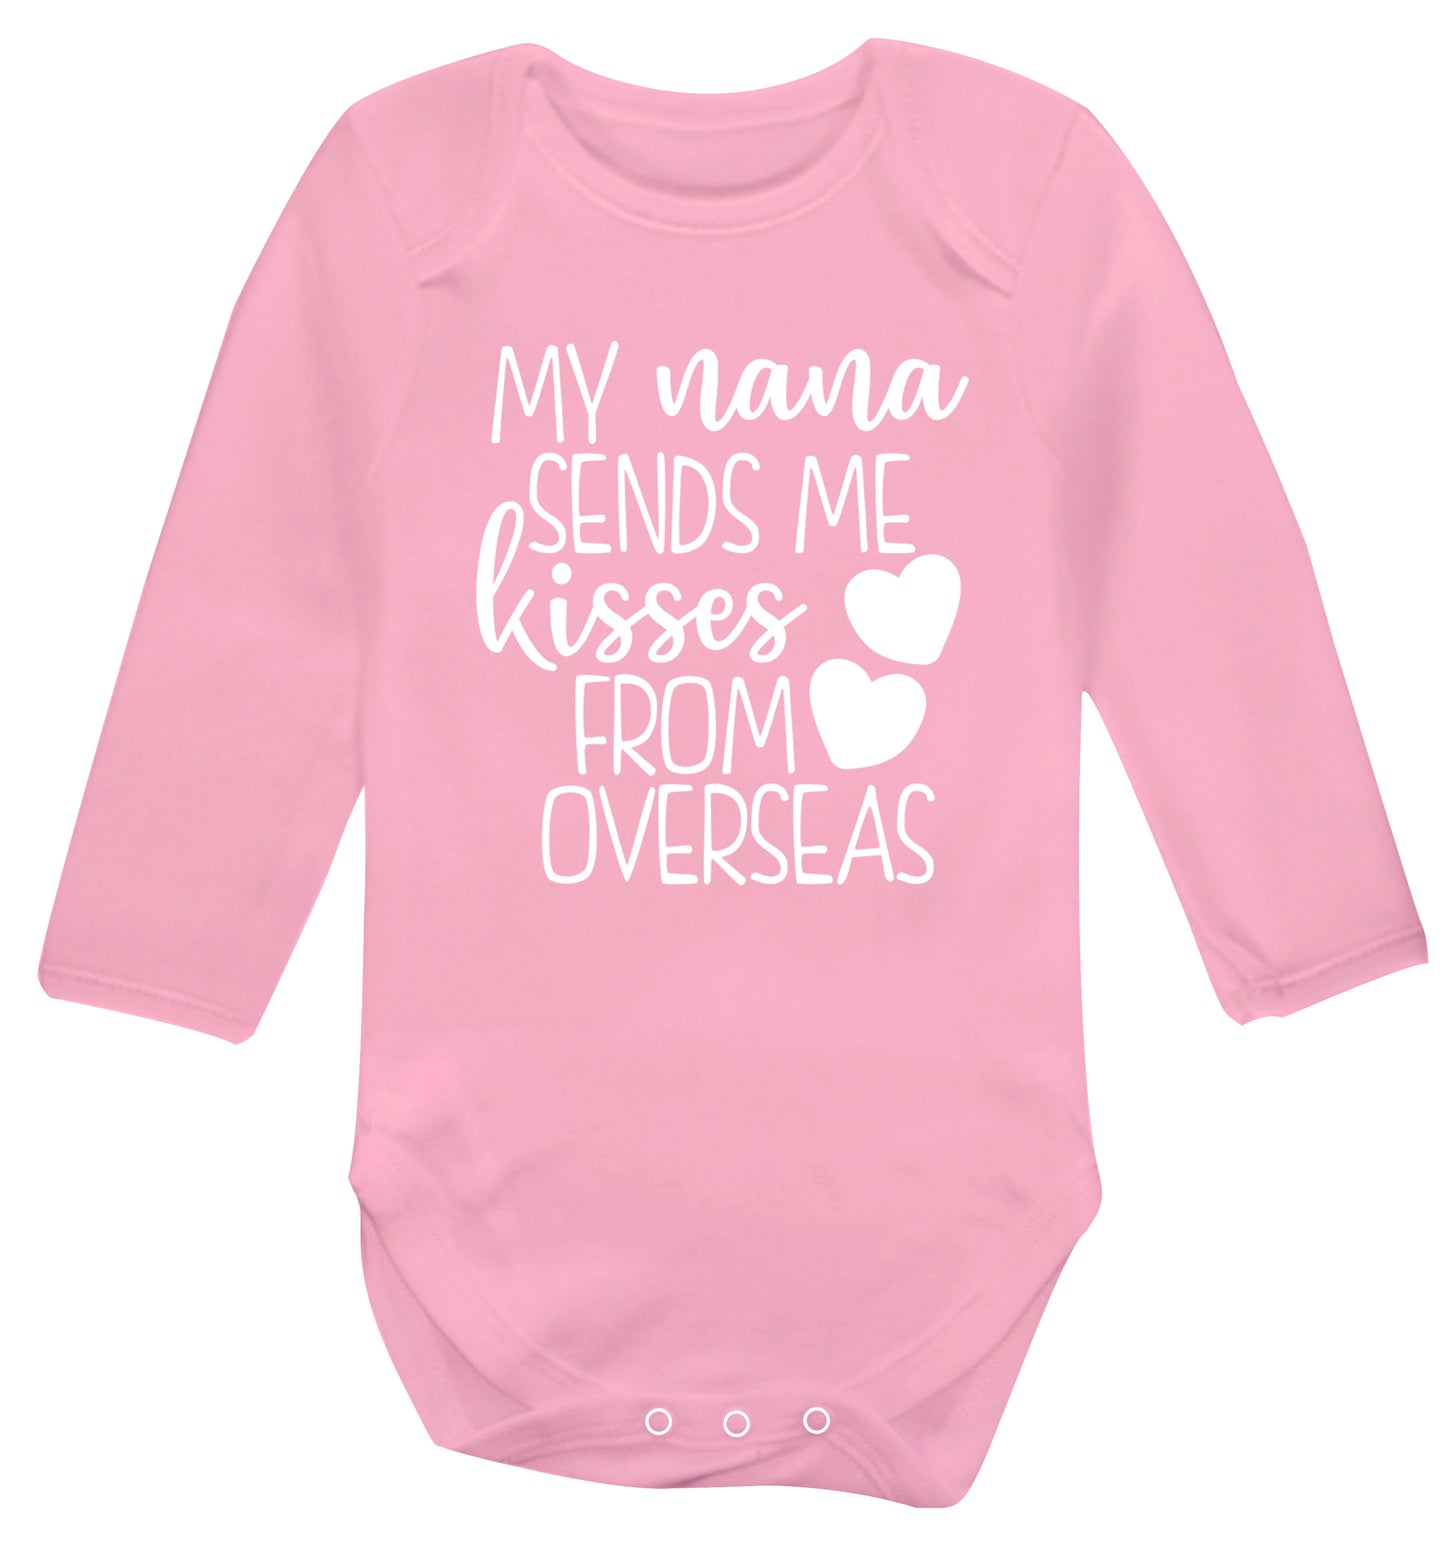 My nana sends me kisses from overseas Baby Vest long sleeved pale pink 6-12 months